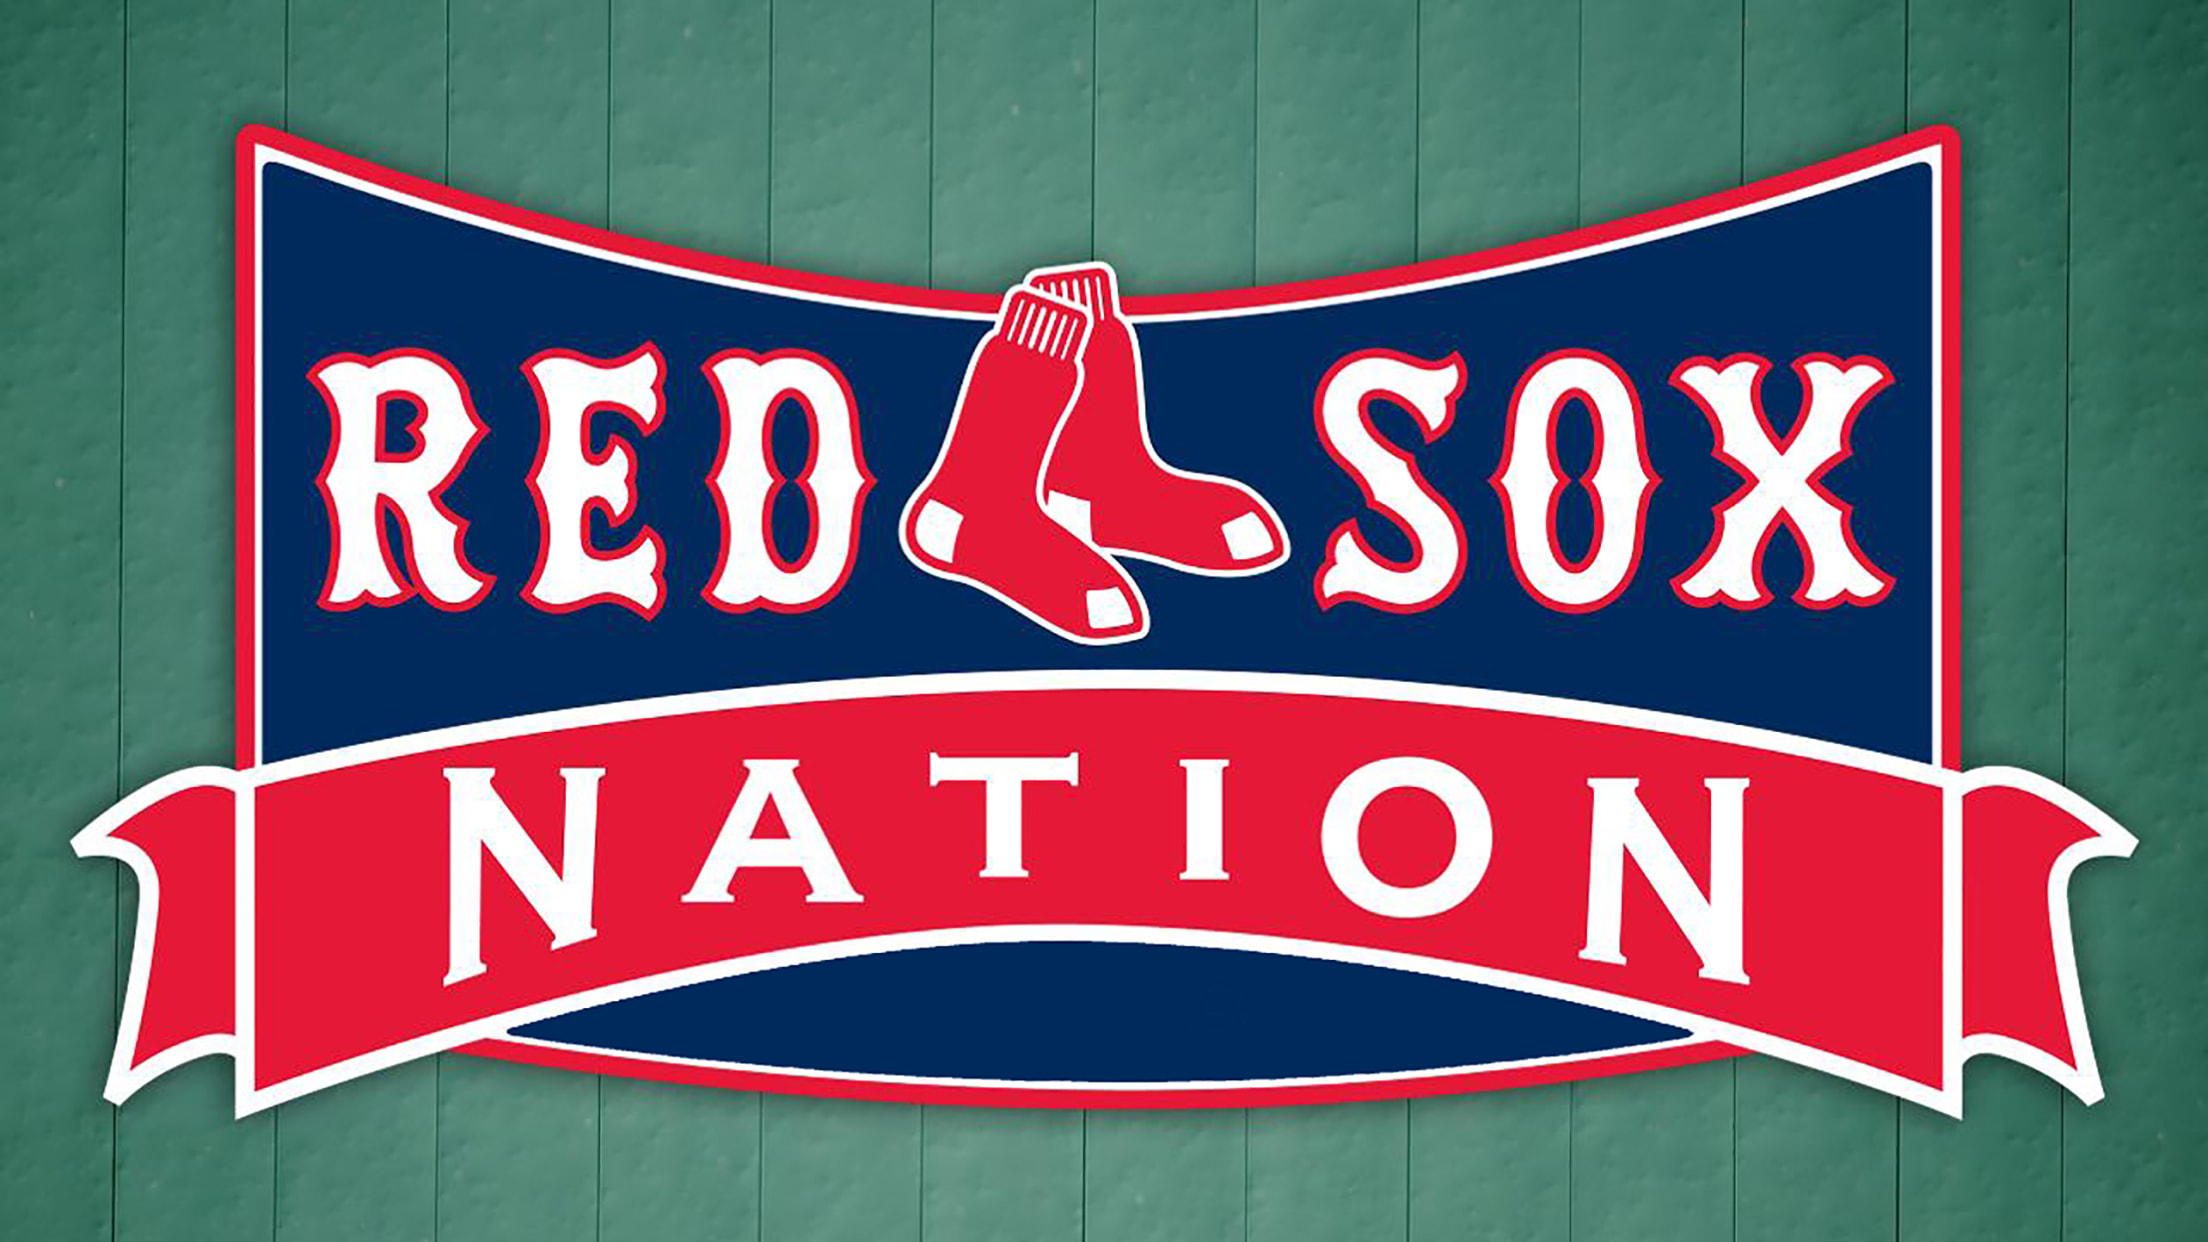 Boston Red Sox - Today is National Socks Day, but we like